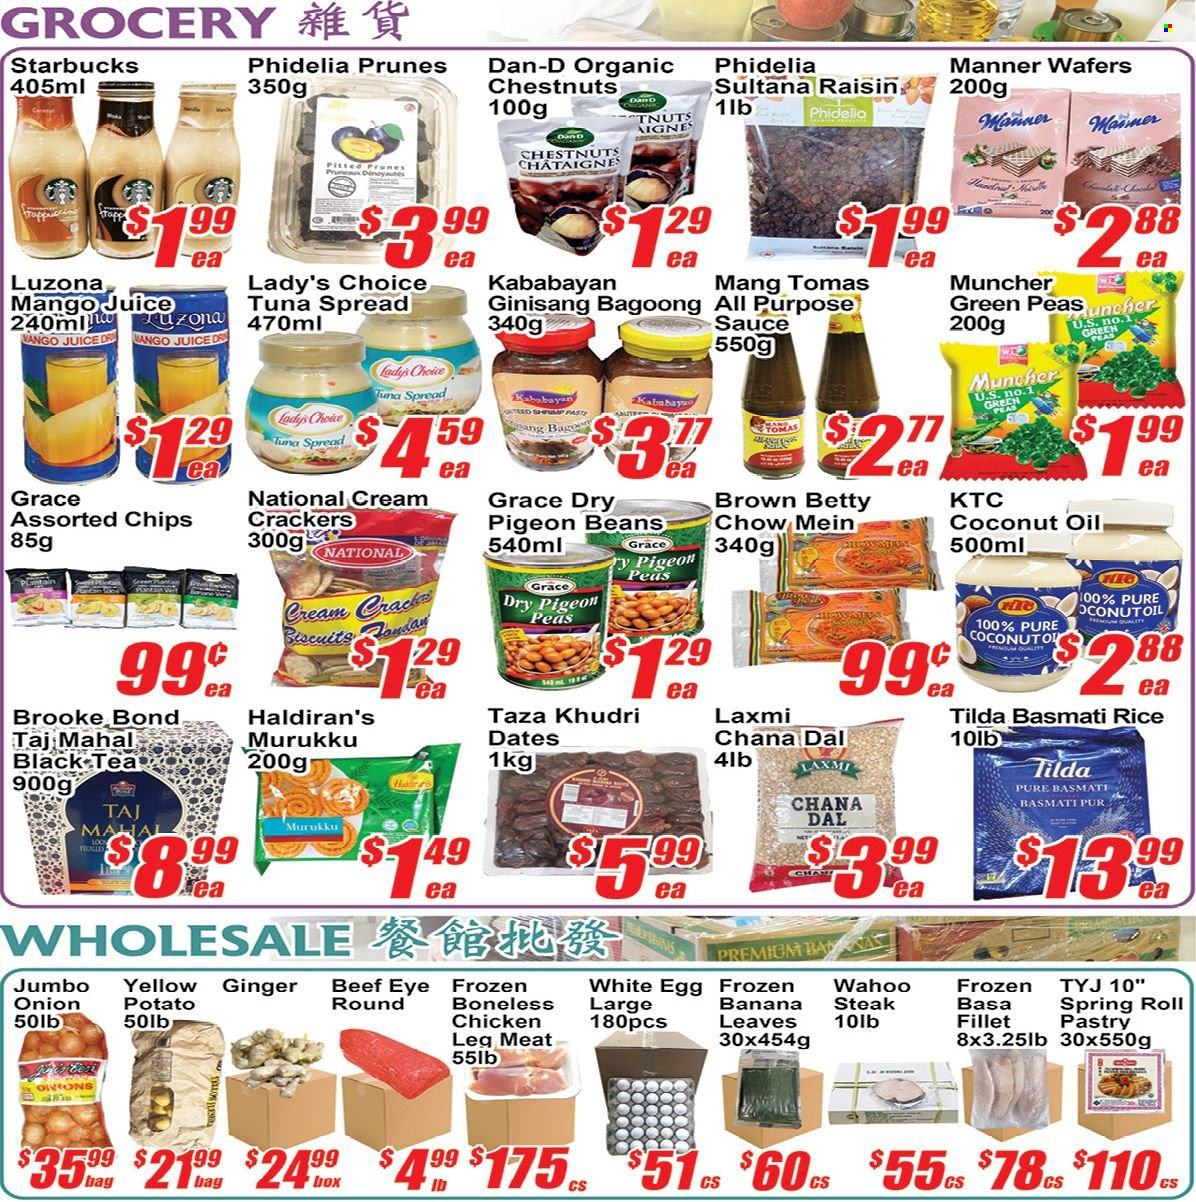 thumbnail - Jian Hing Supermarket Flyer - July 01, 2022 - July 07, 2022 - Sales products - beans, ginger, peas, onion, tuna, sauce, eggs, wafers, crackers, biscuit, basmati rice, rice, toor dal, chana dal, shrimp paste, coconut oil, oil, prunes, chestnuts, dried fruit, juice, tea, Starbucks, chicken legs, beef meat, eye of round, steak. Page 3.